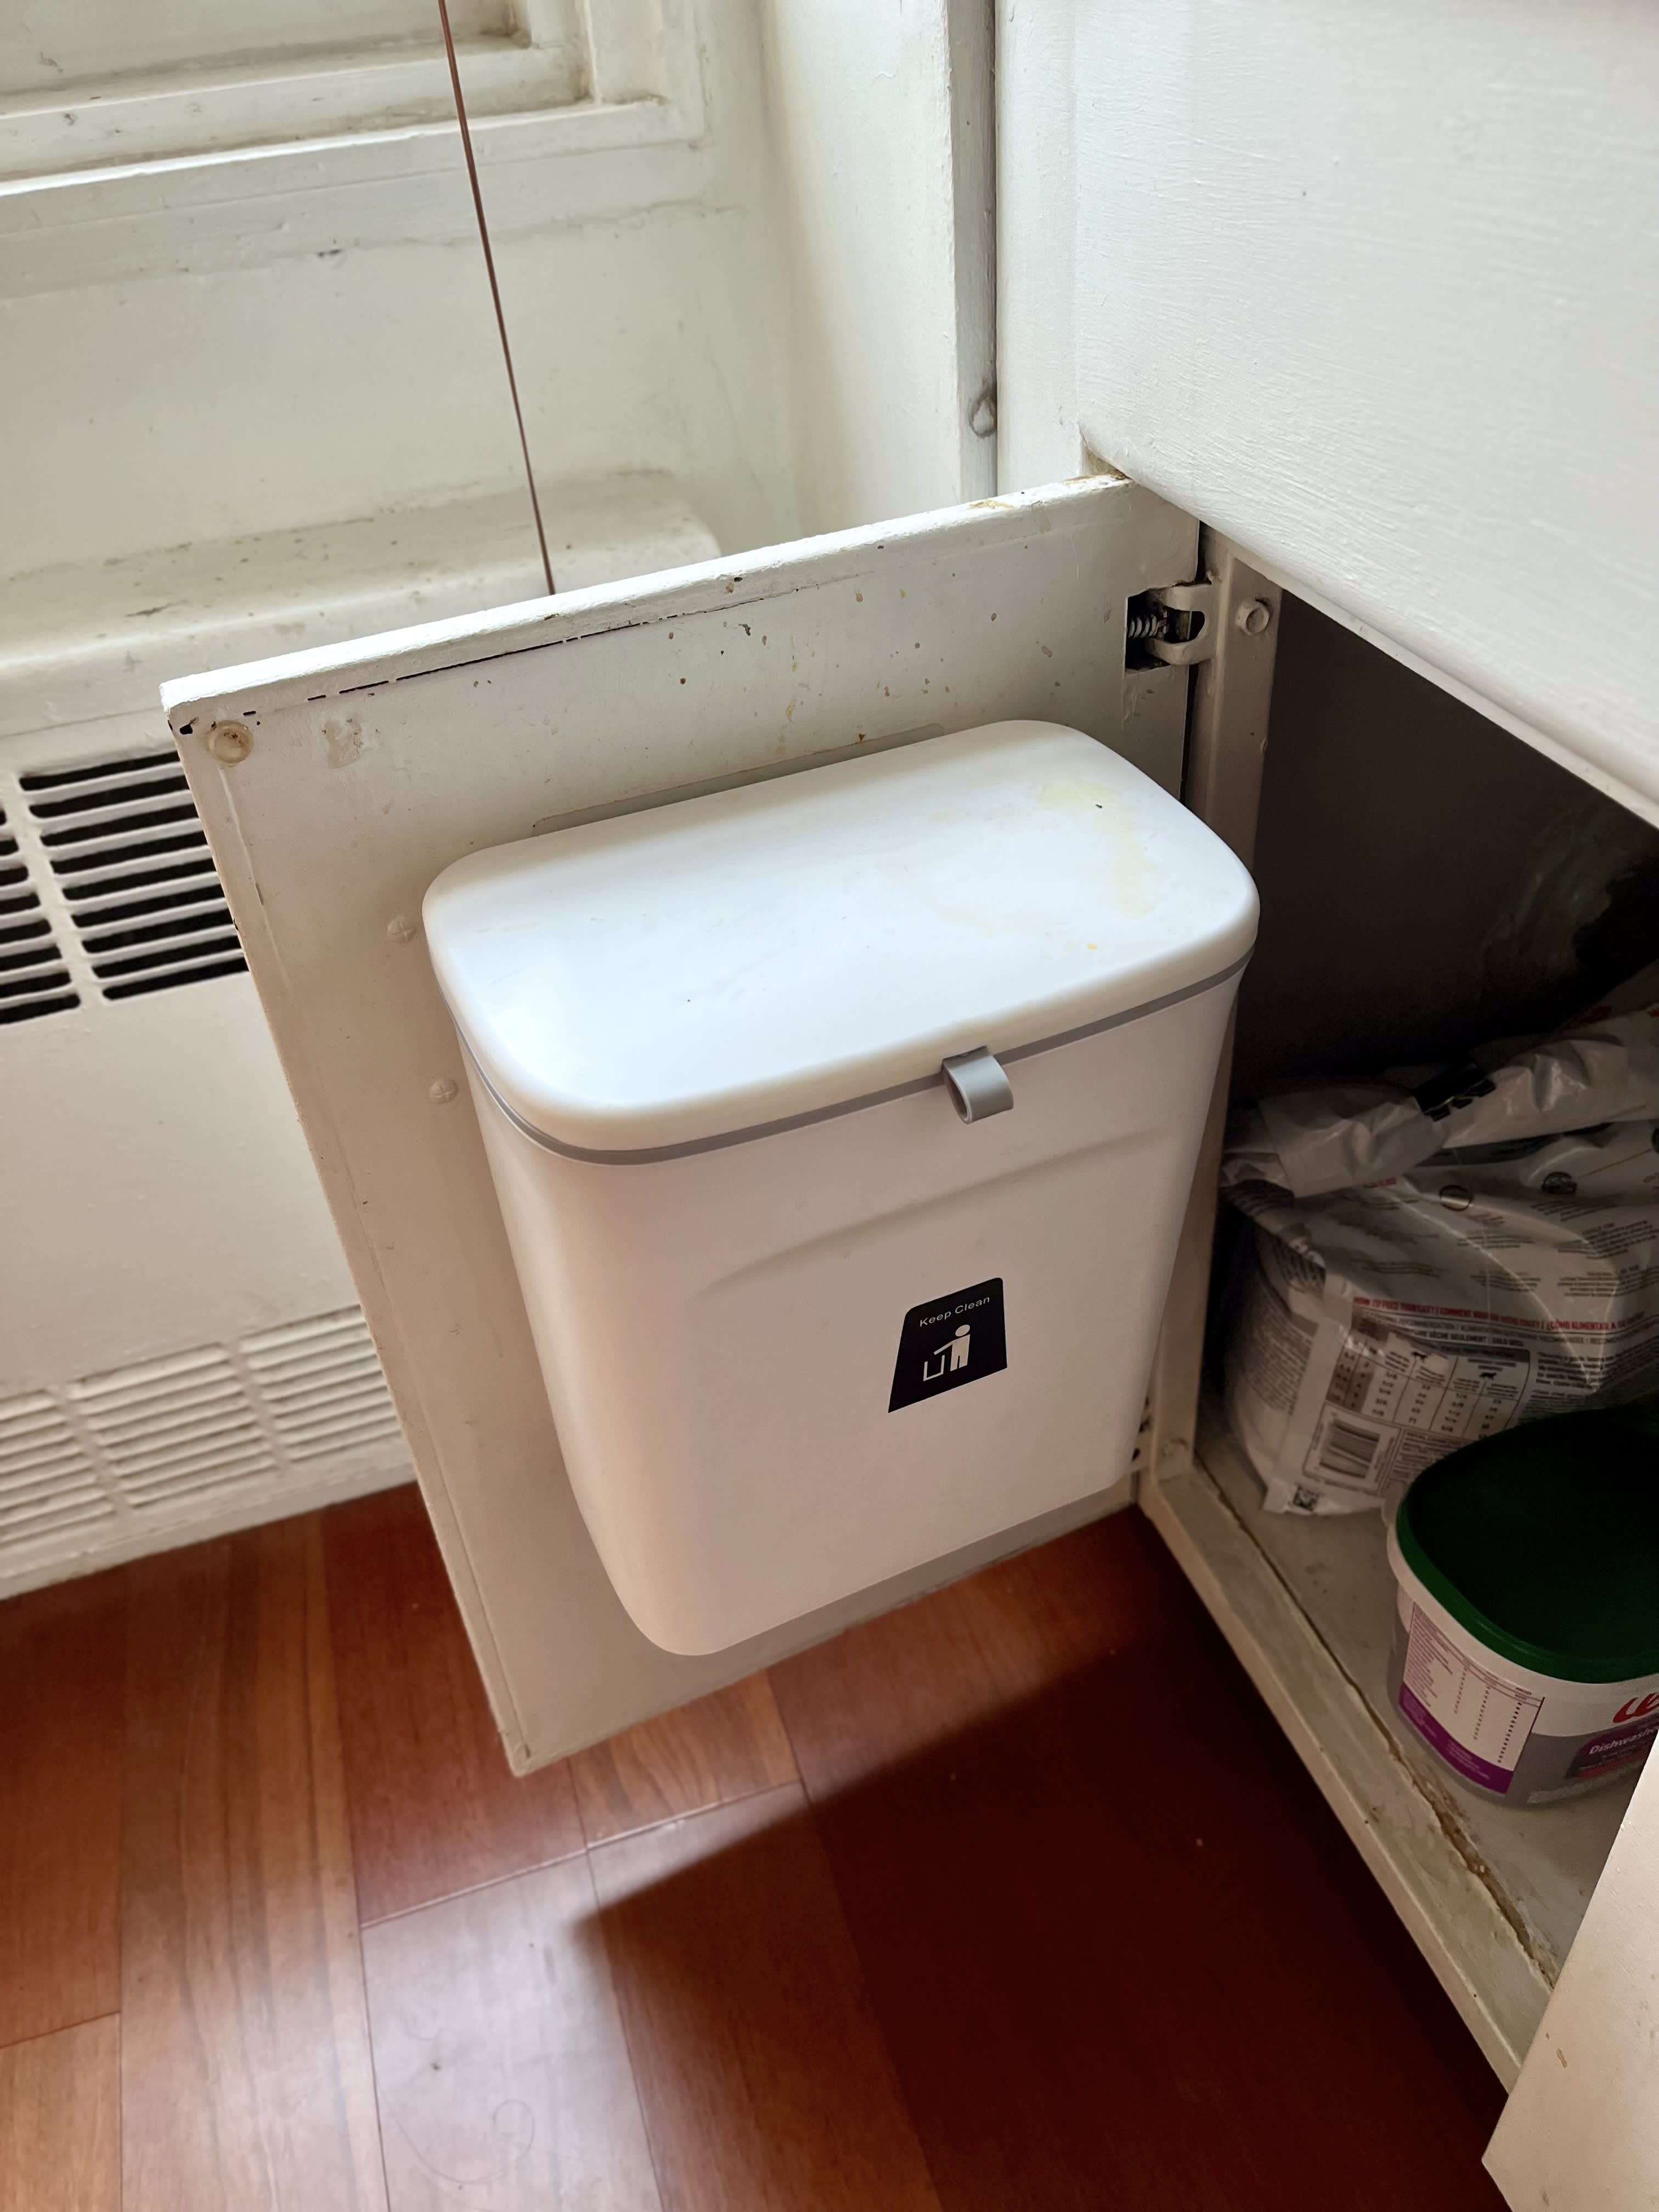 Why I Love the VIGIND Hanging Trash Can: Tried & Tested